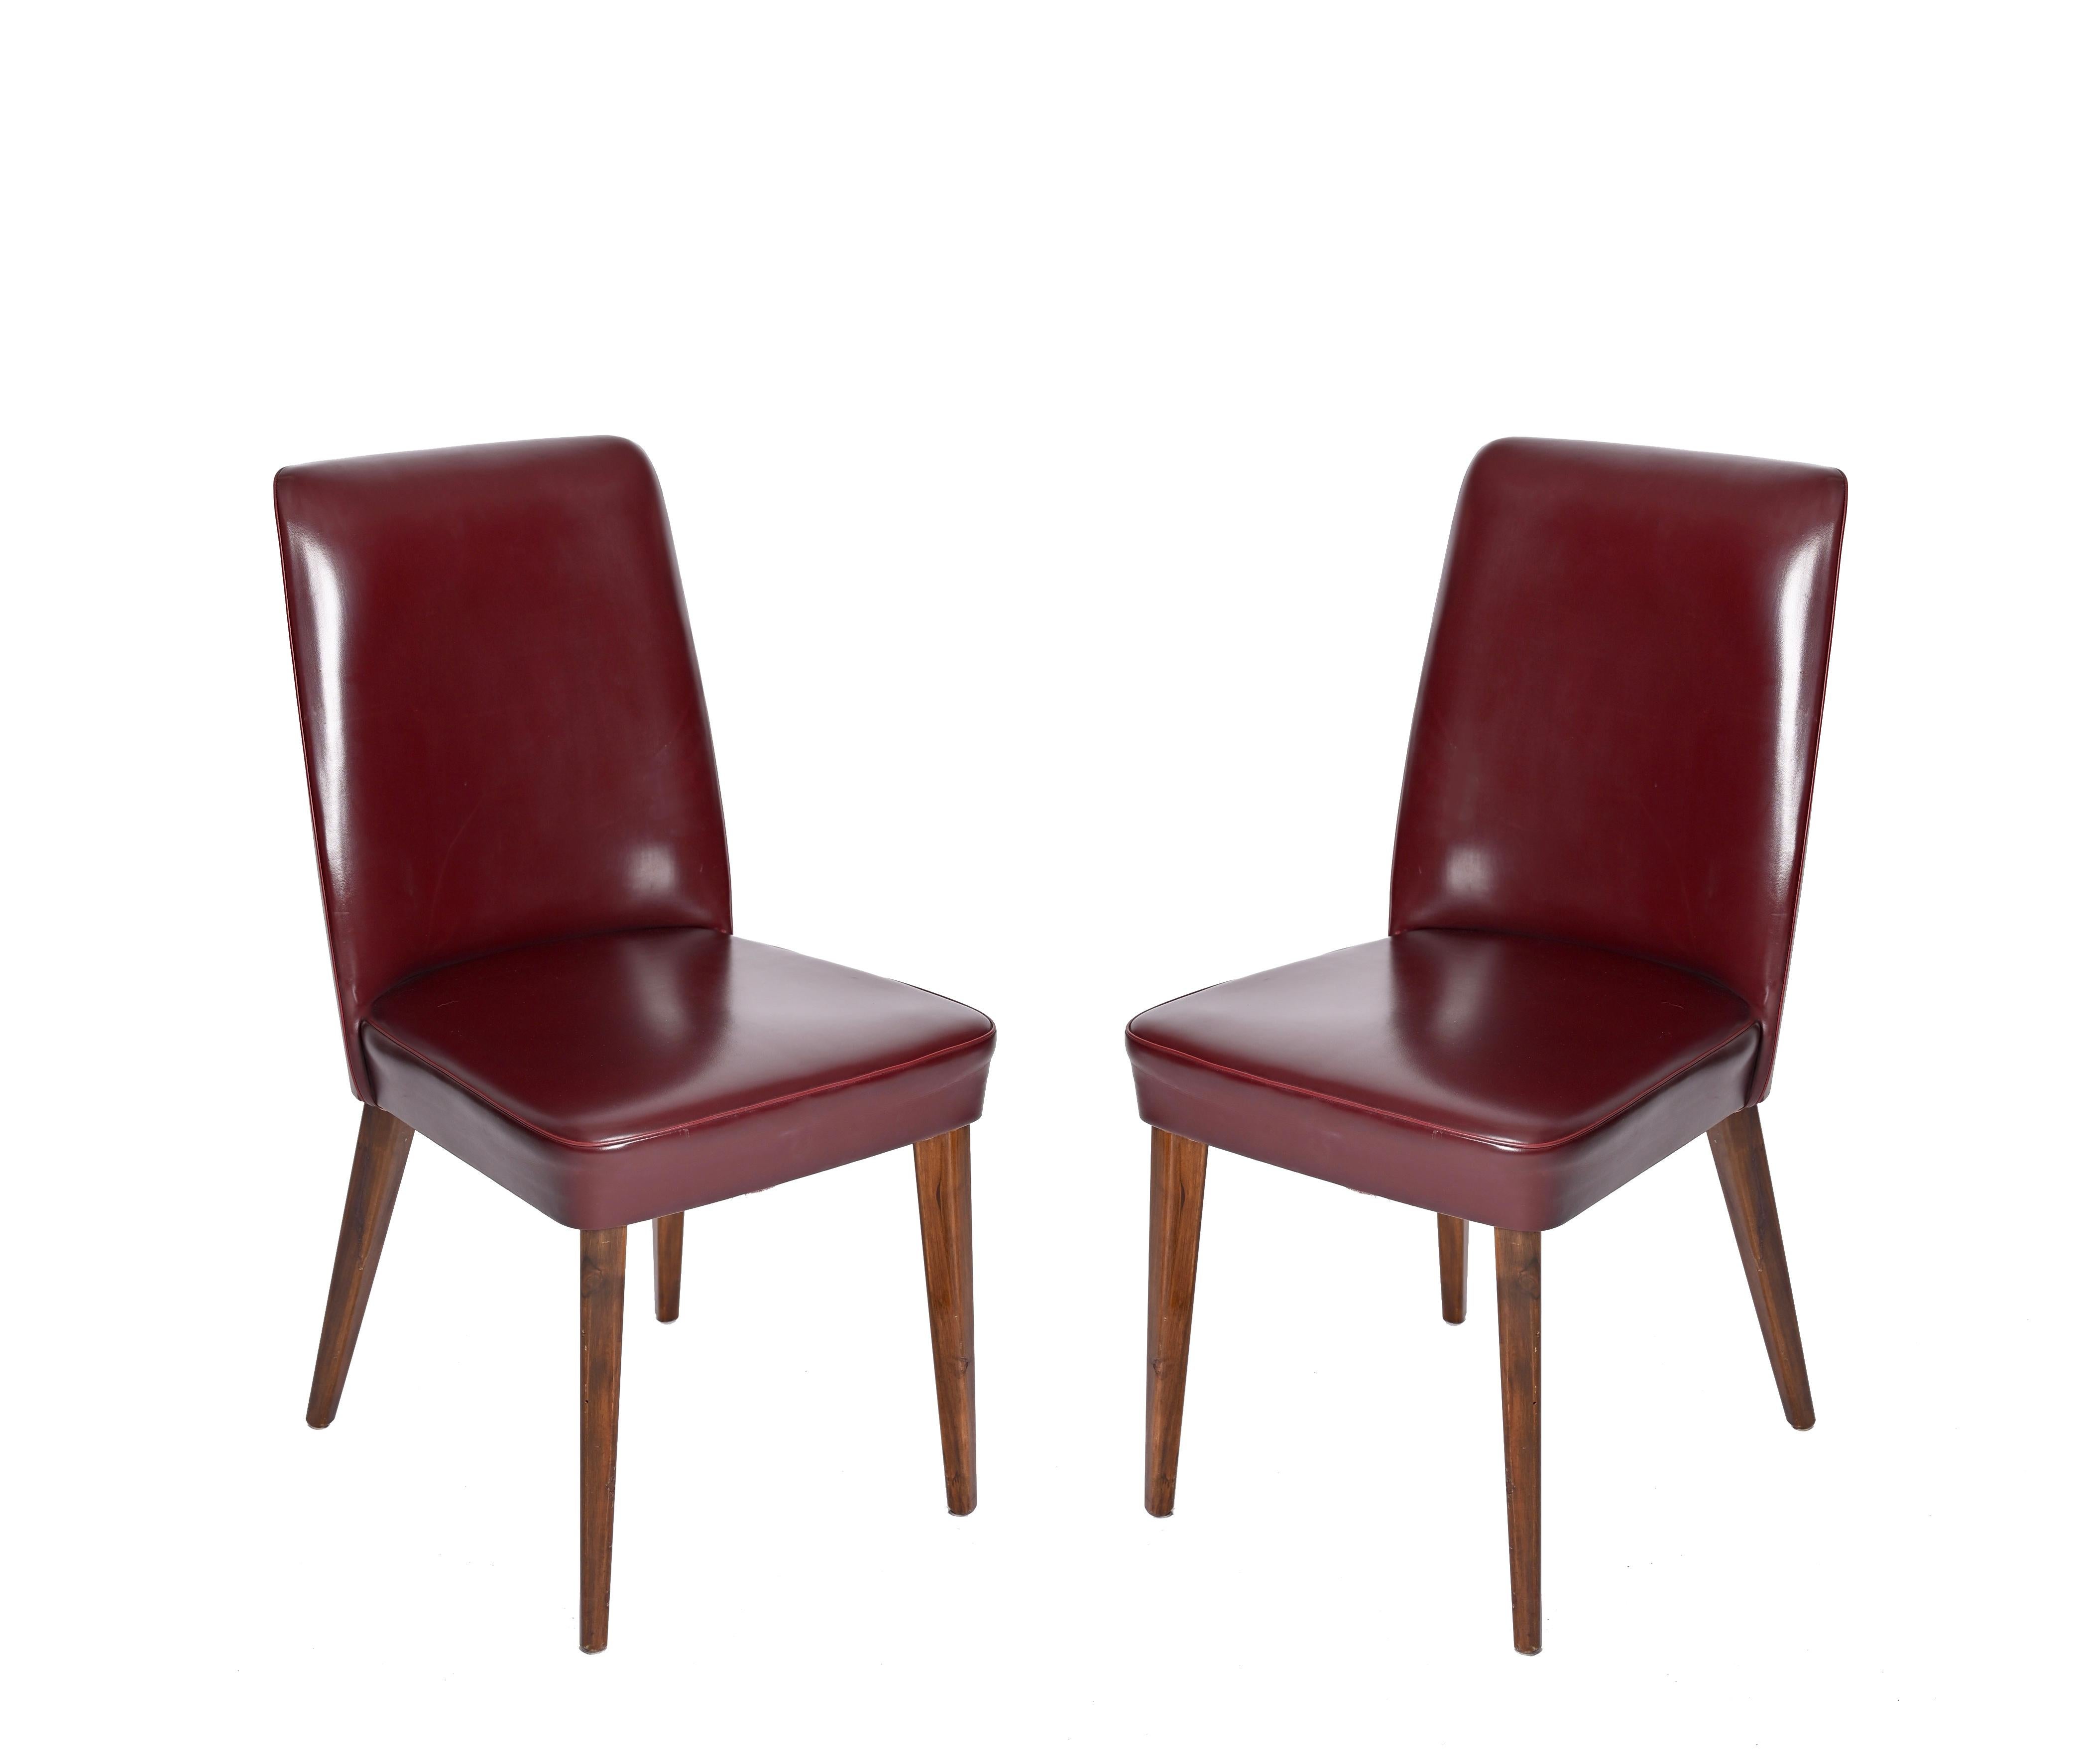 Pair of Bordeaux Leather Chairs by Anonima Castelli, Italy, 1950s For Sale 2